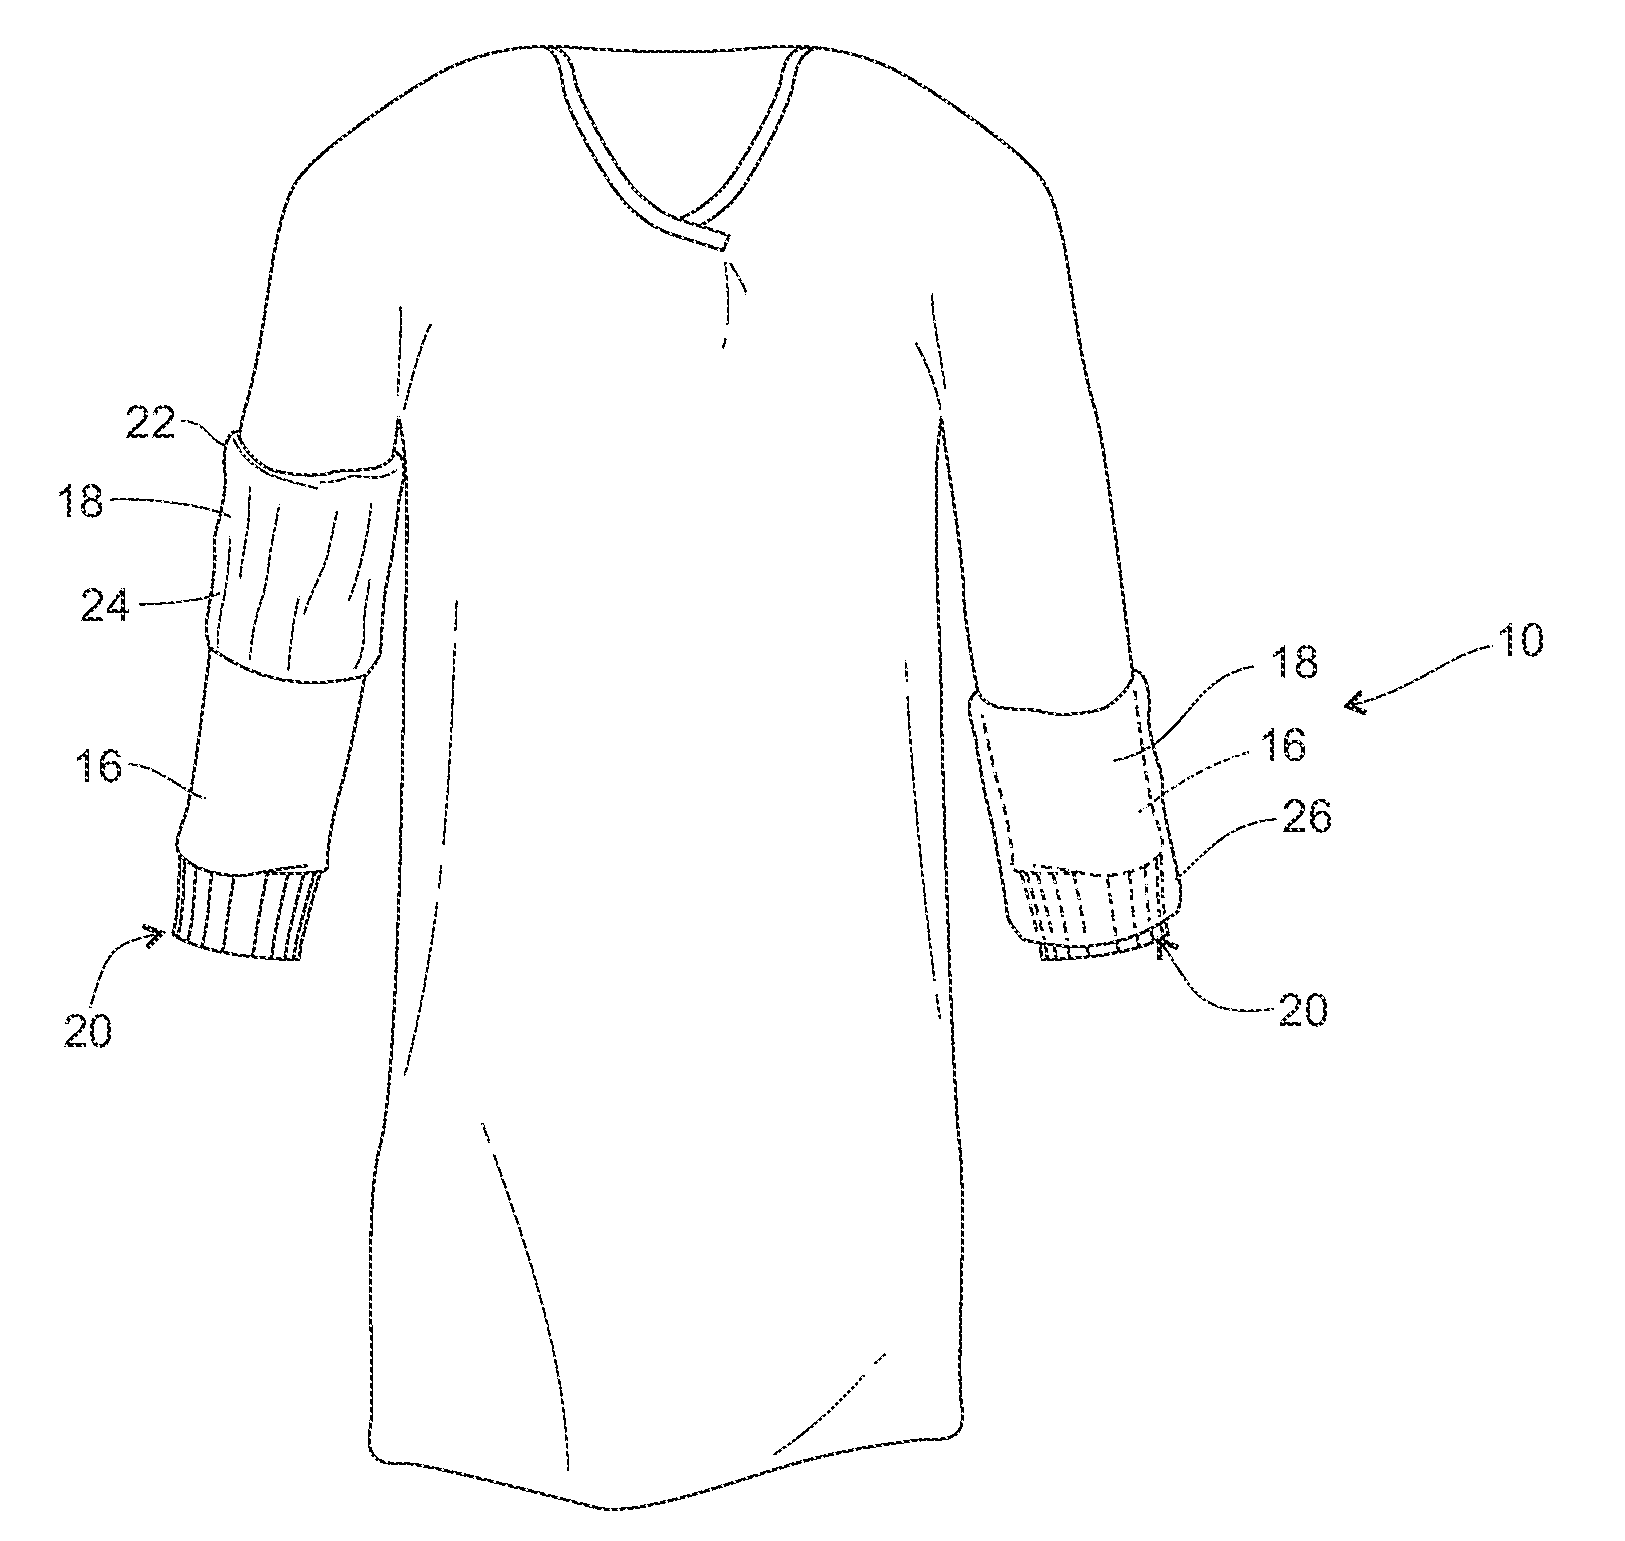 Medical gown with a secondary sleeve for extending over a surgical glove